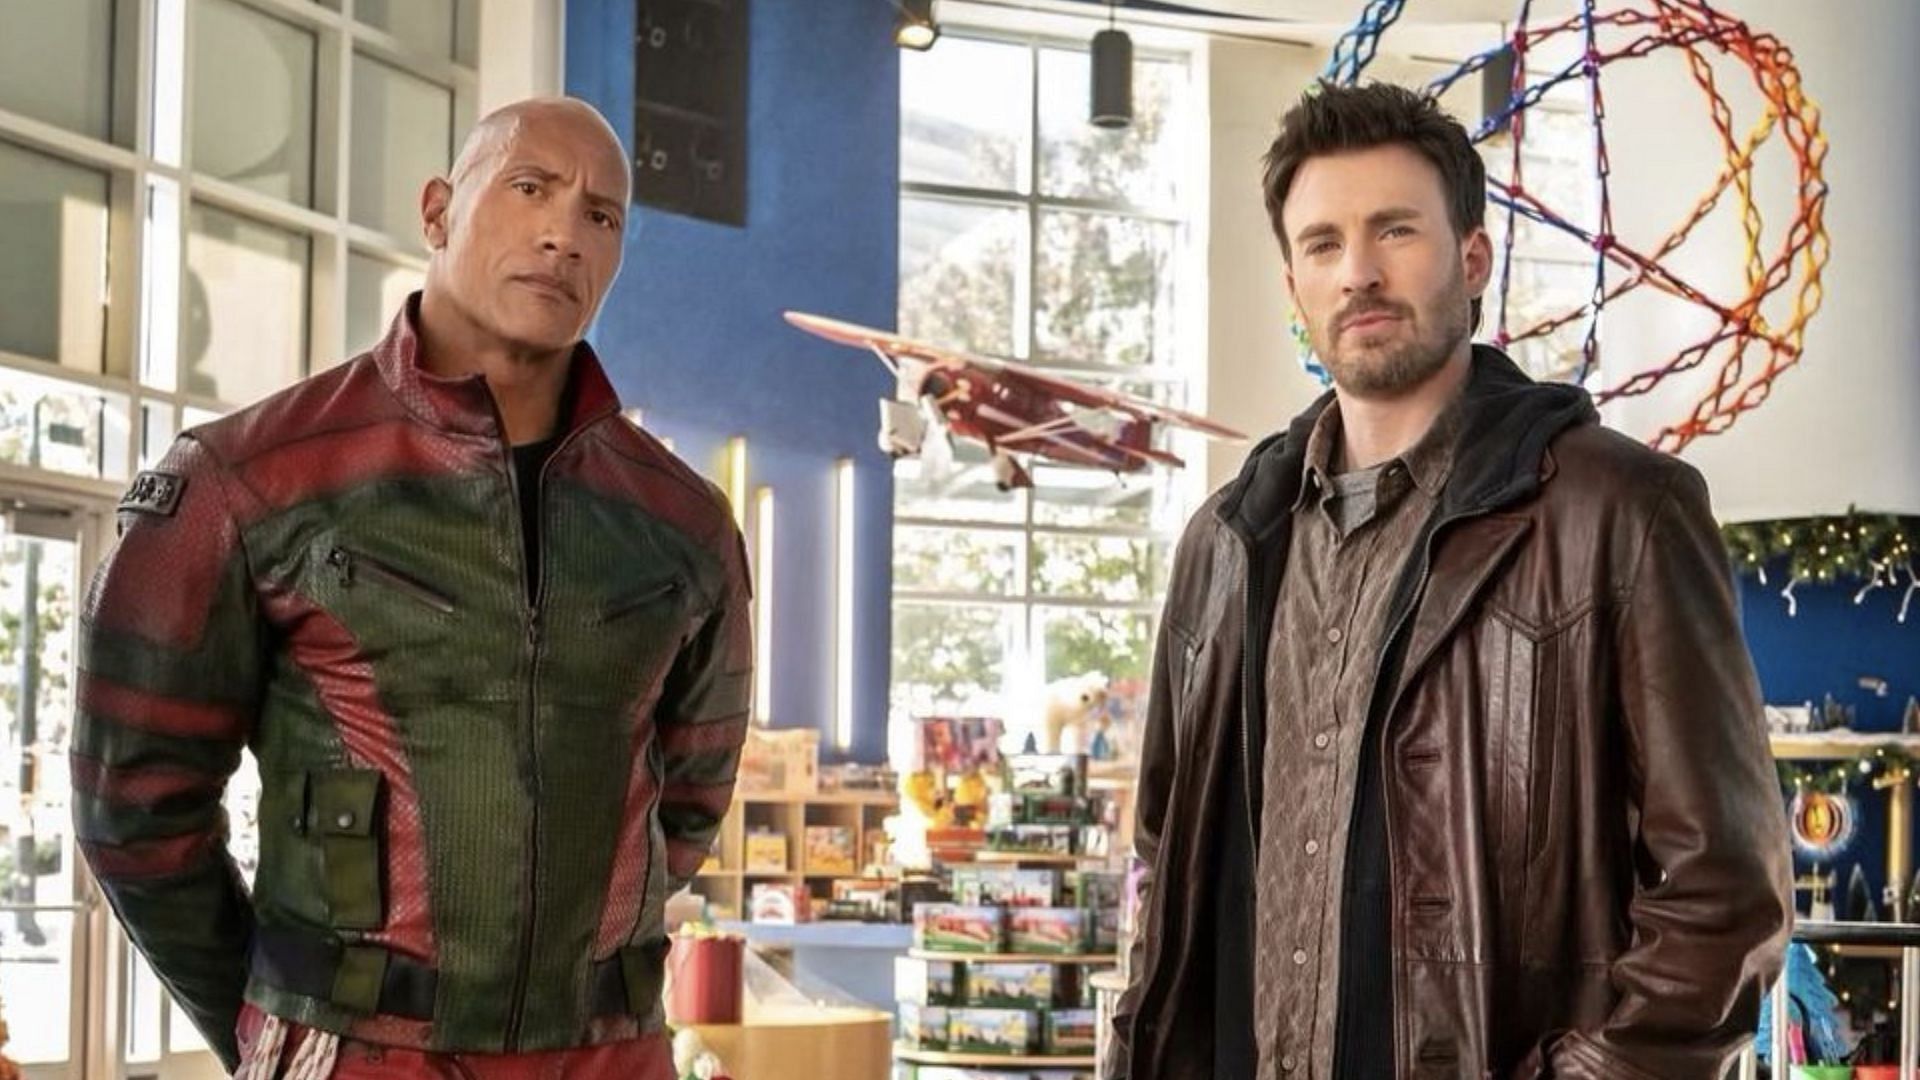 Dwayne Johnson and Chris Evans in Red One (Image via Amazon Studios)